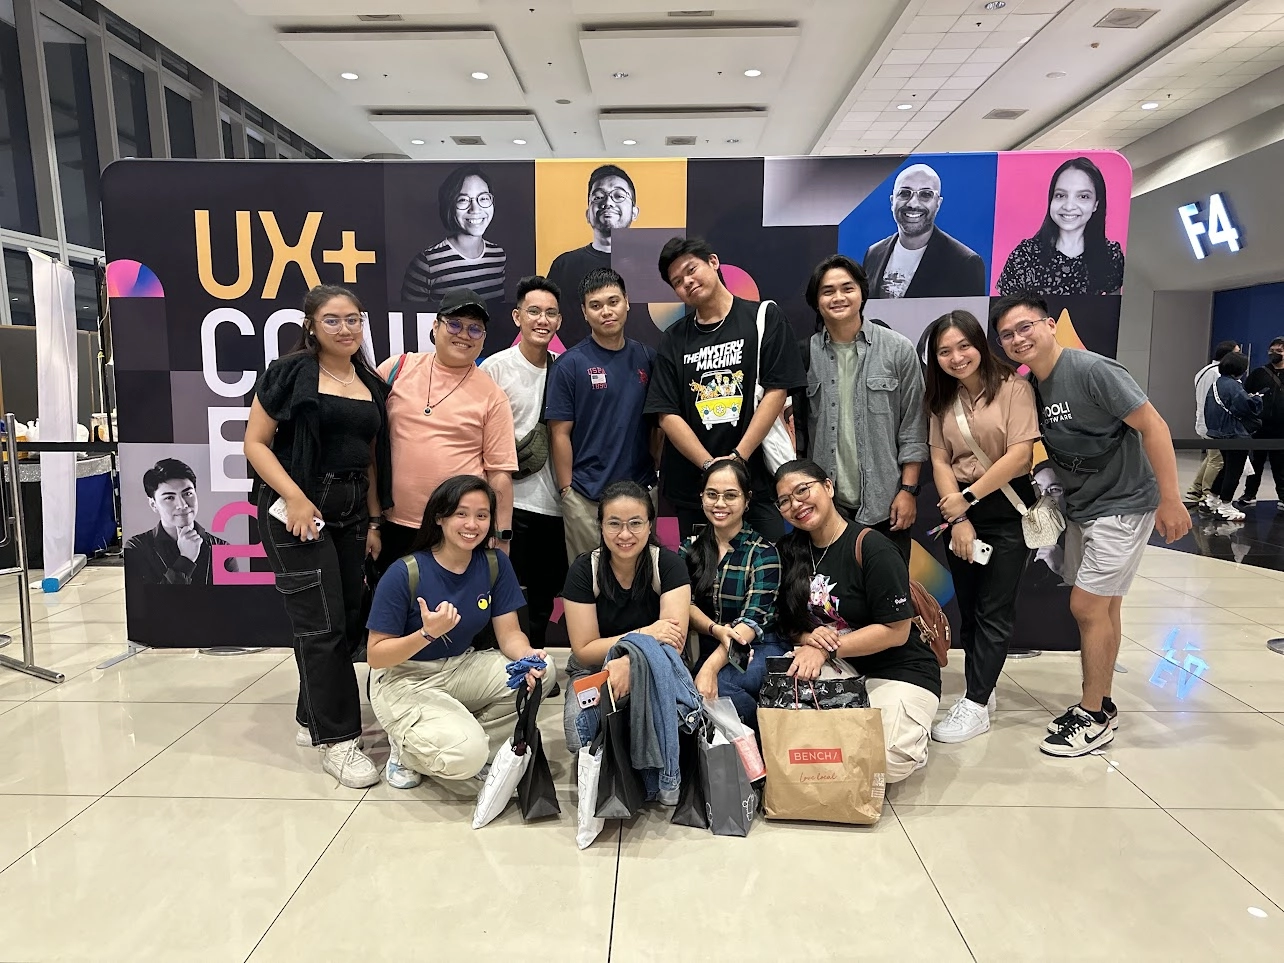 UX conference attended by MPH / Hooli Software Technical Design team